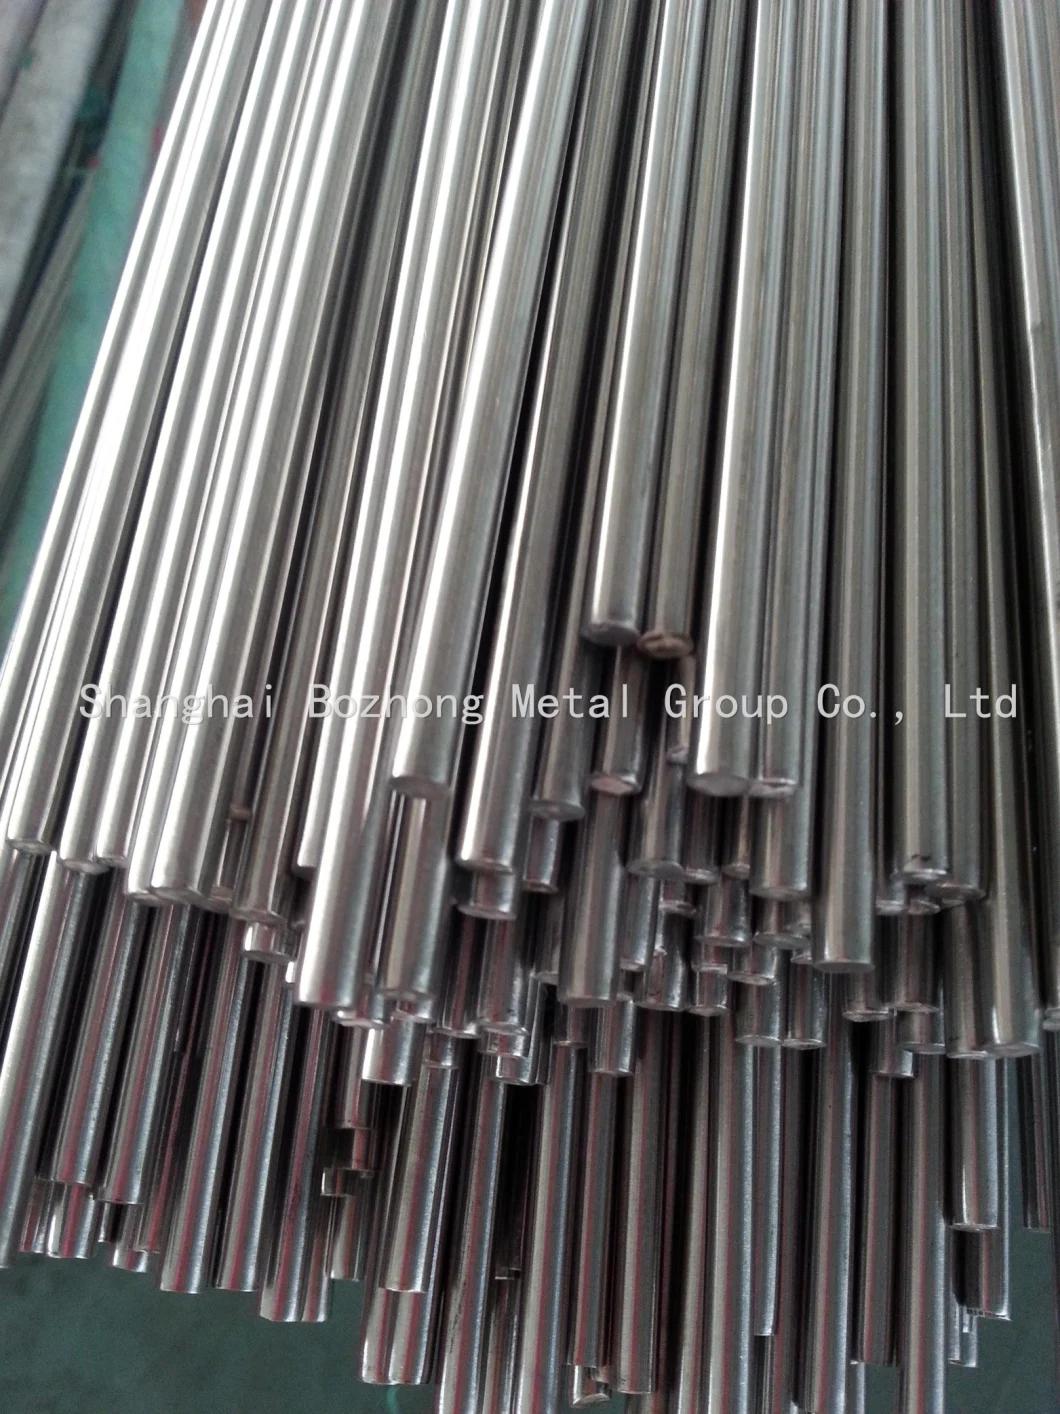 2.4360/Monel 400 Heat-Resistant Stainless Steel Round Bar Coil Plate Bar Pipe Fitting Flange Square Tube Round Bar Hollow Section Rod Bar Wire Sheet